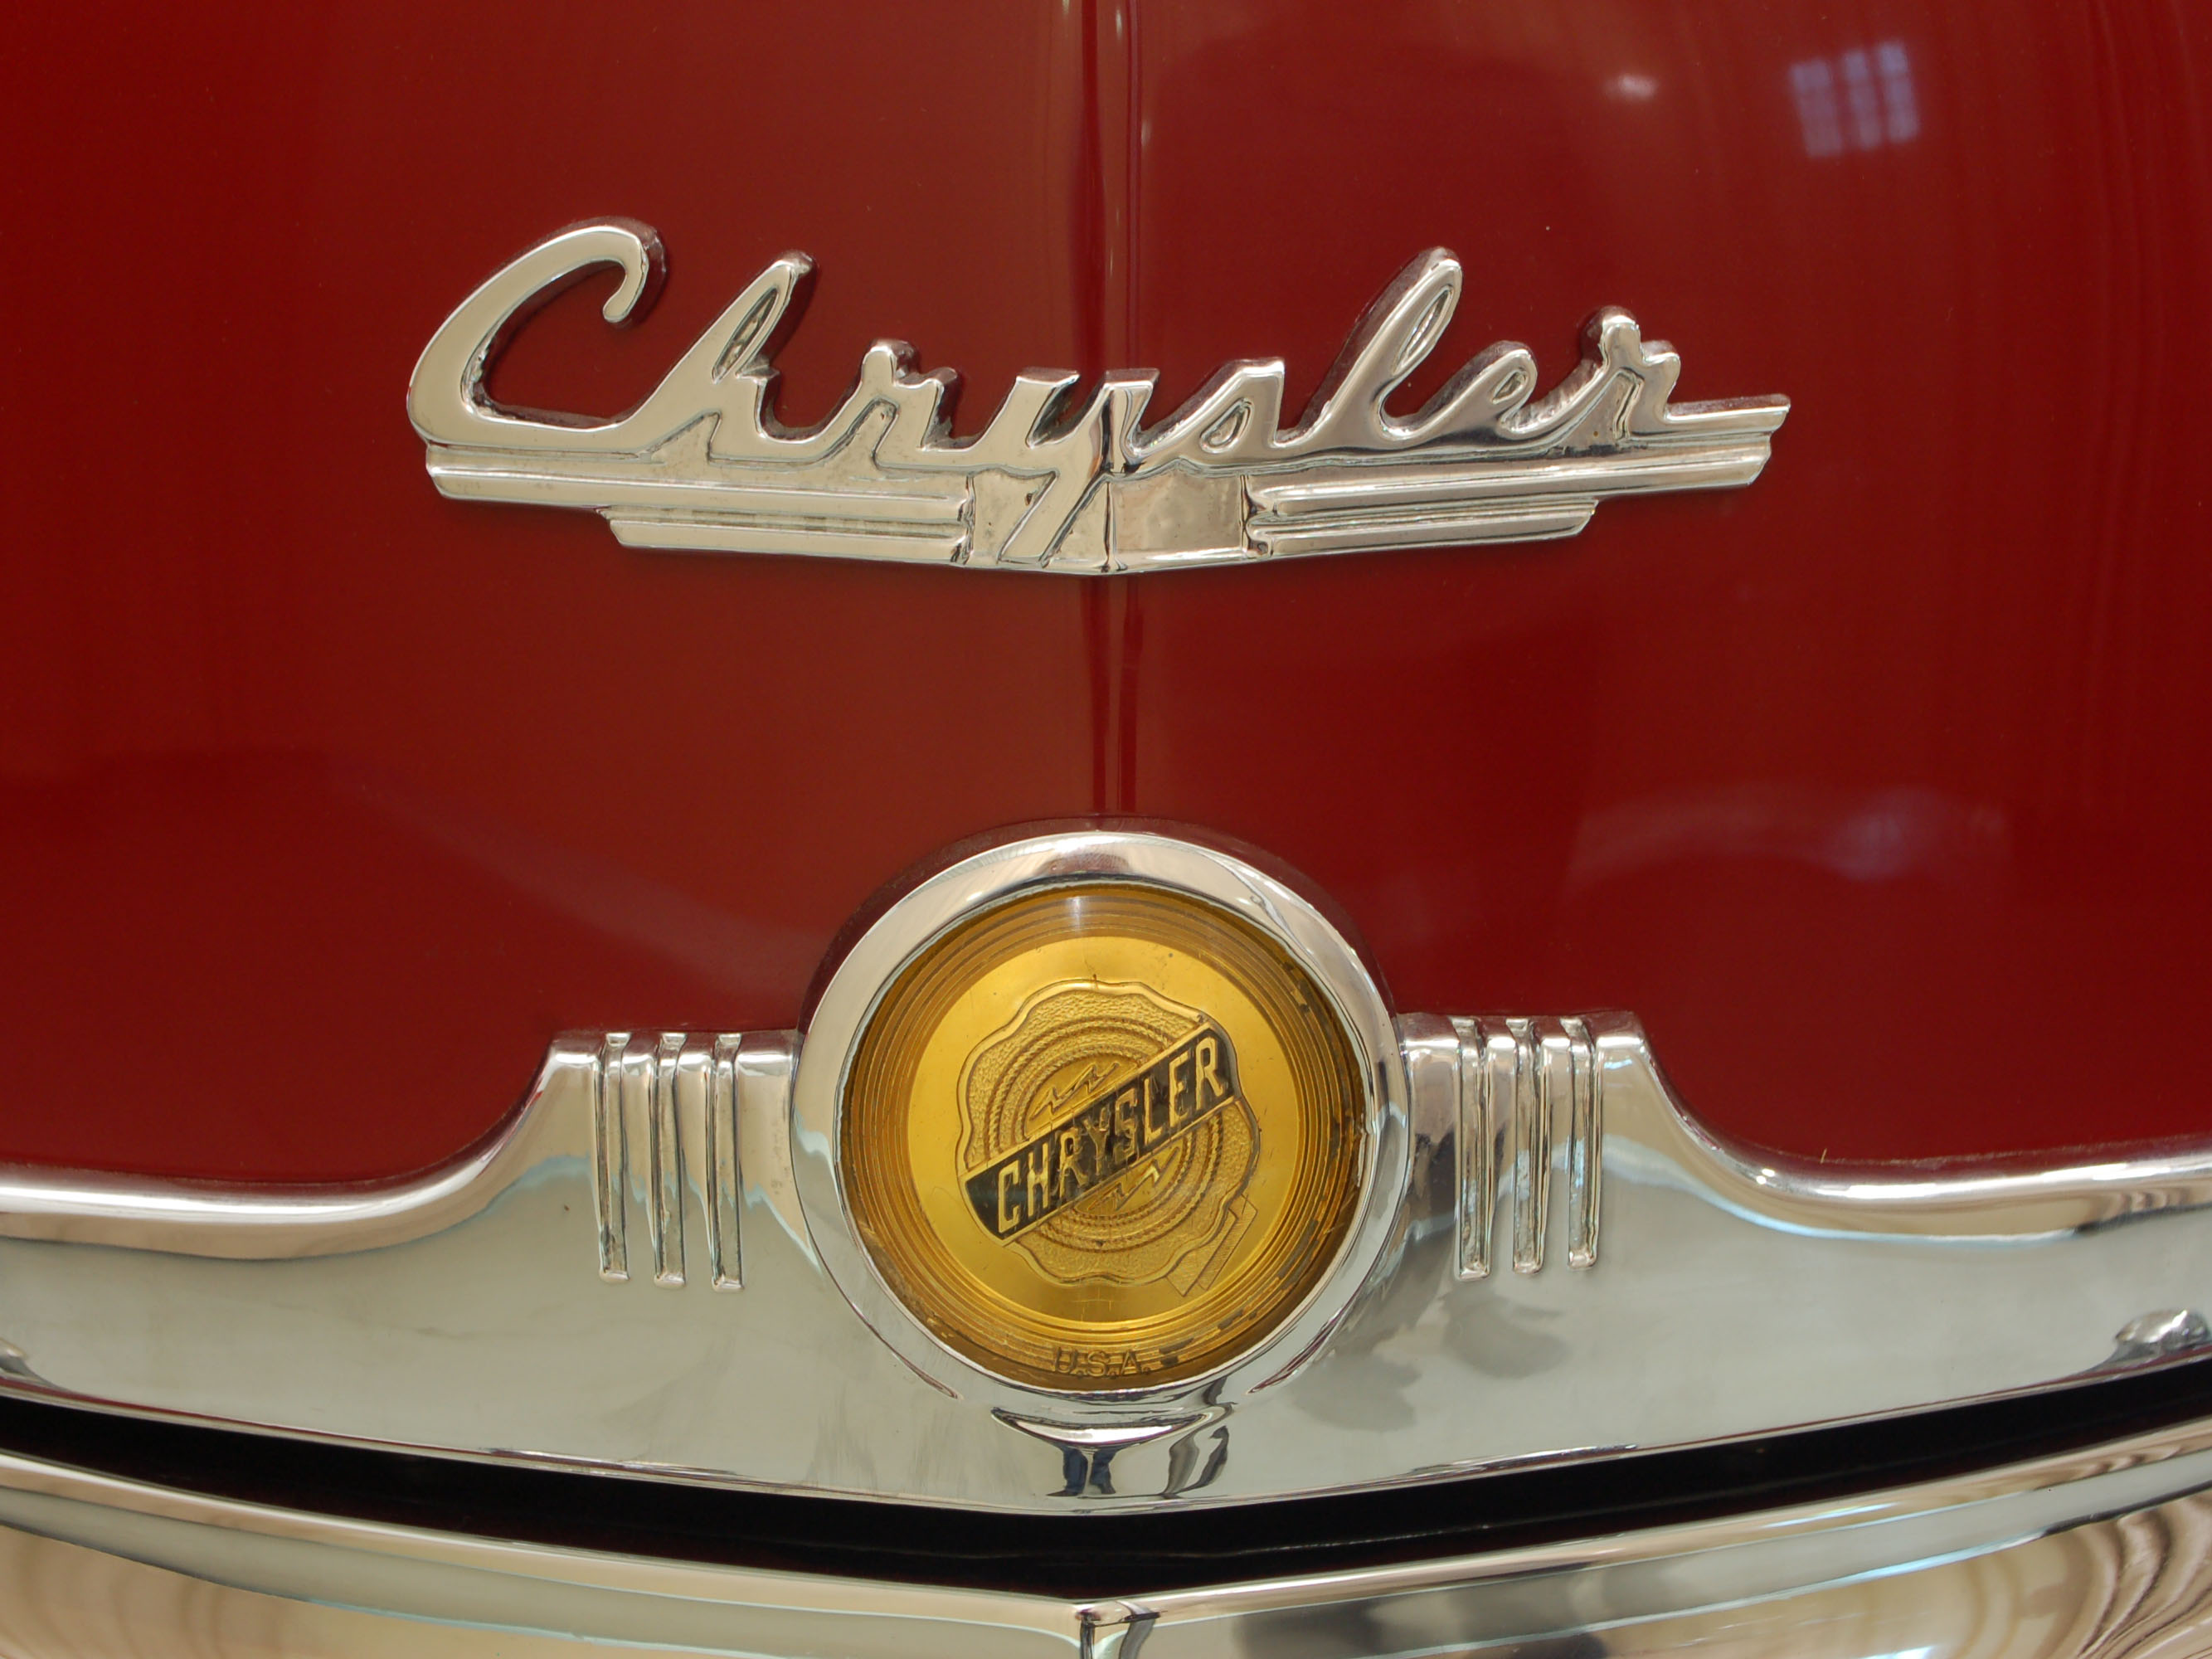 1950 chrysler town & country